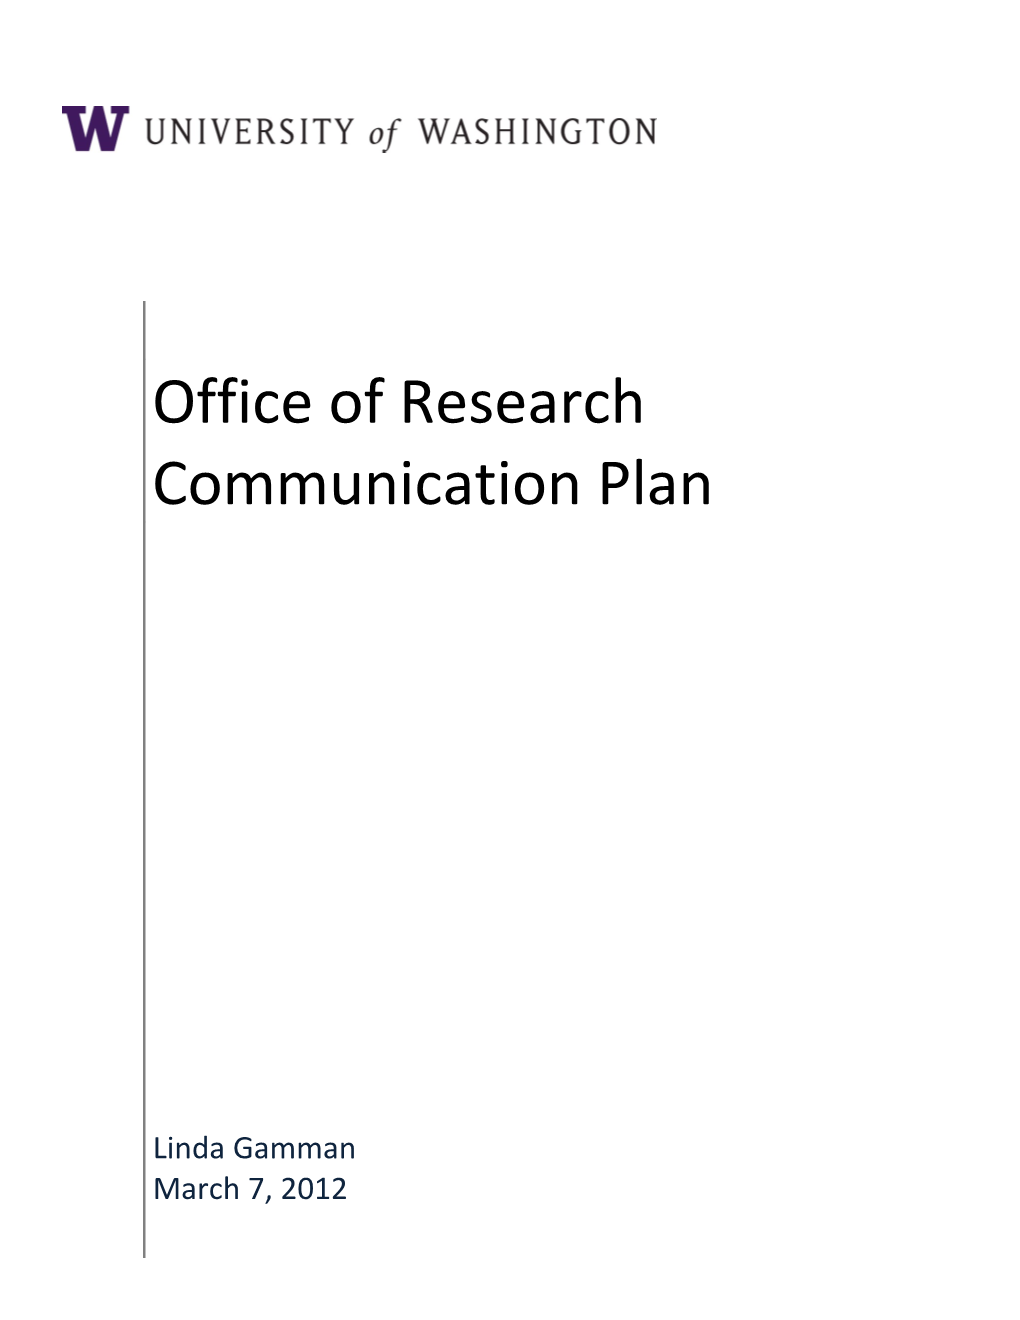 Office of Research Communication Plan